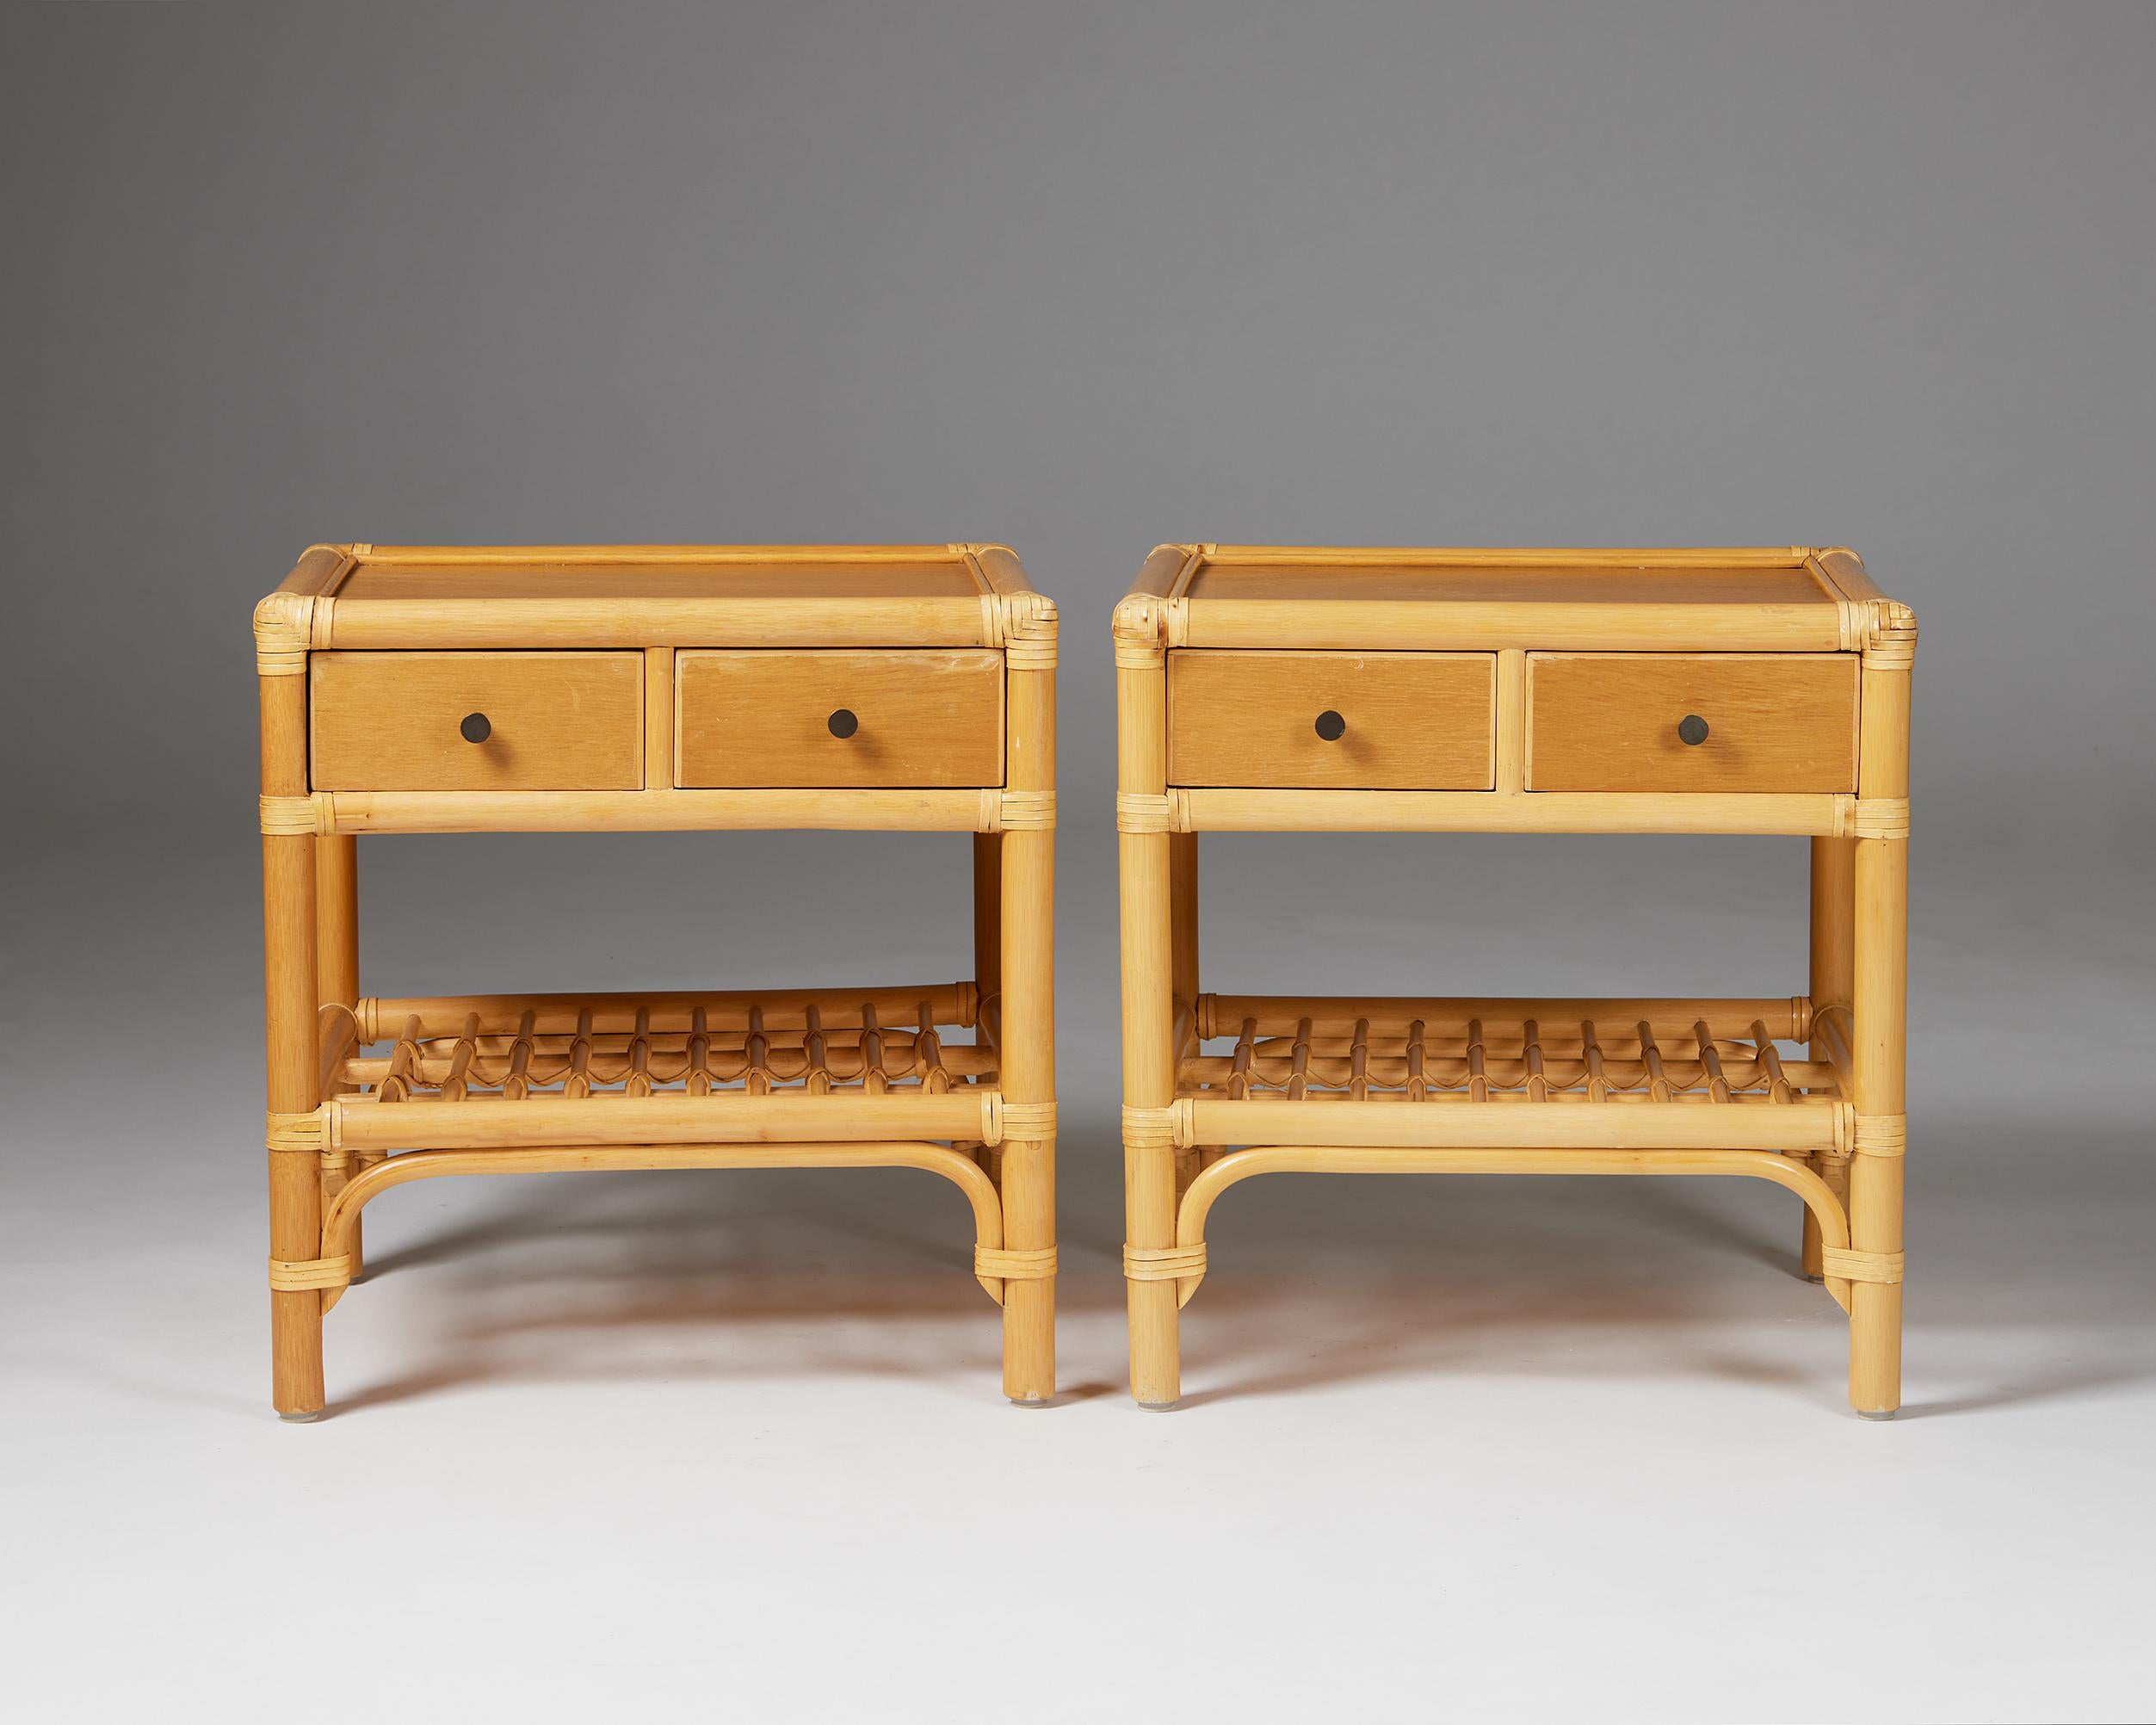 Swedish Pair of Bedside Tables, Anonymous for DUX, Sweden, 1960s For Sale